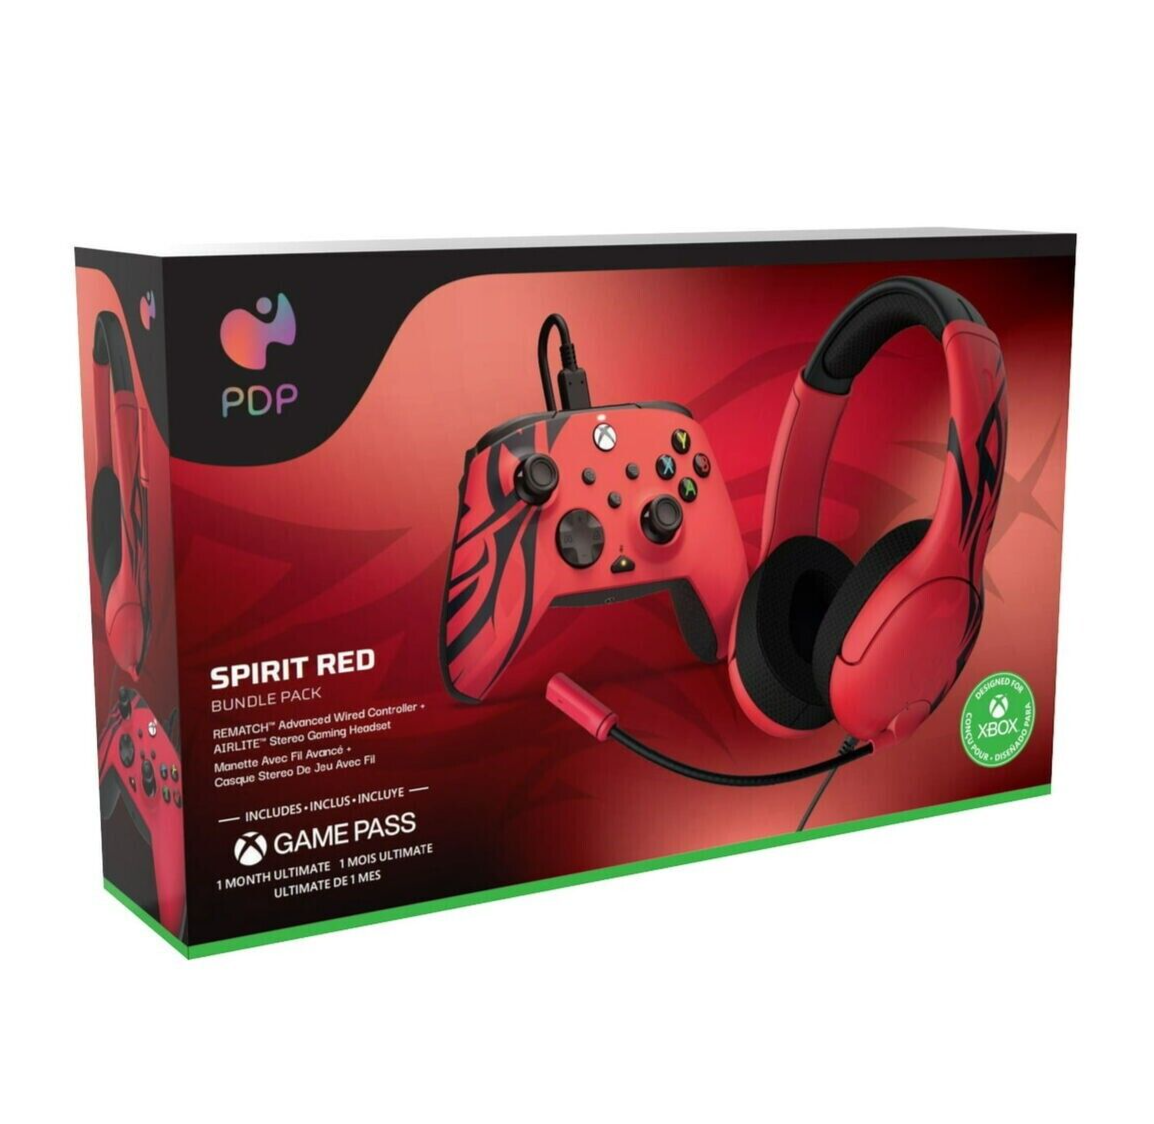 PDP Rematch Advanced Gaming Wired Controller & Airlite Stereo Gaming Headset